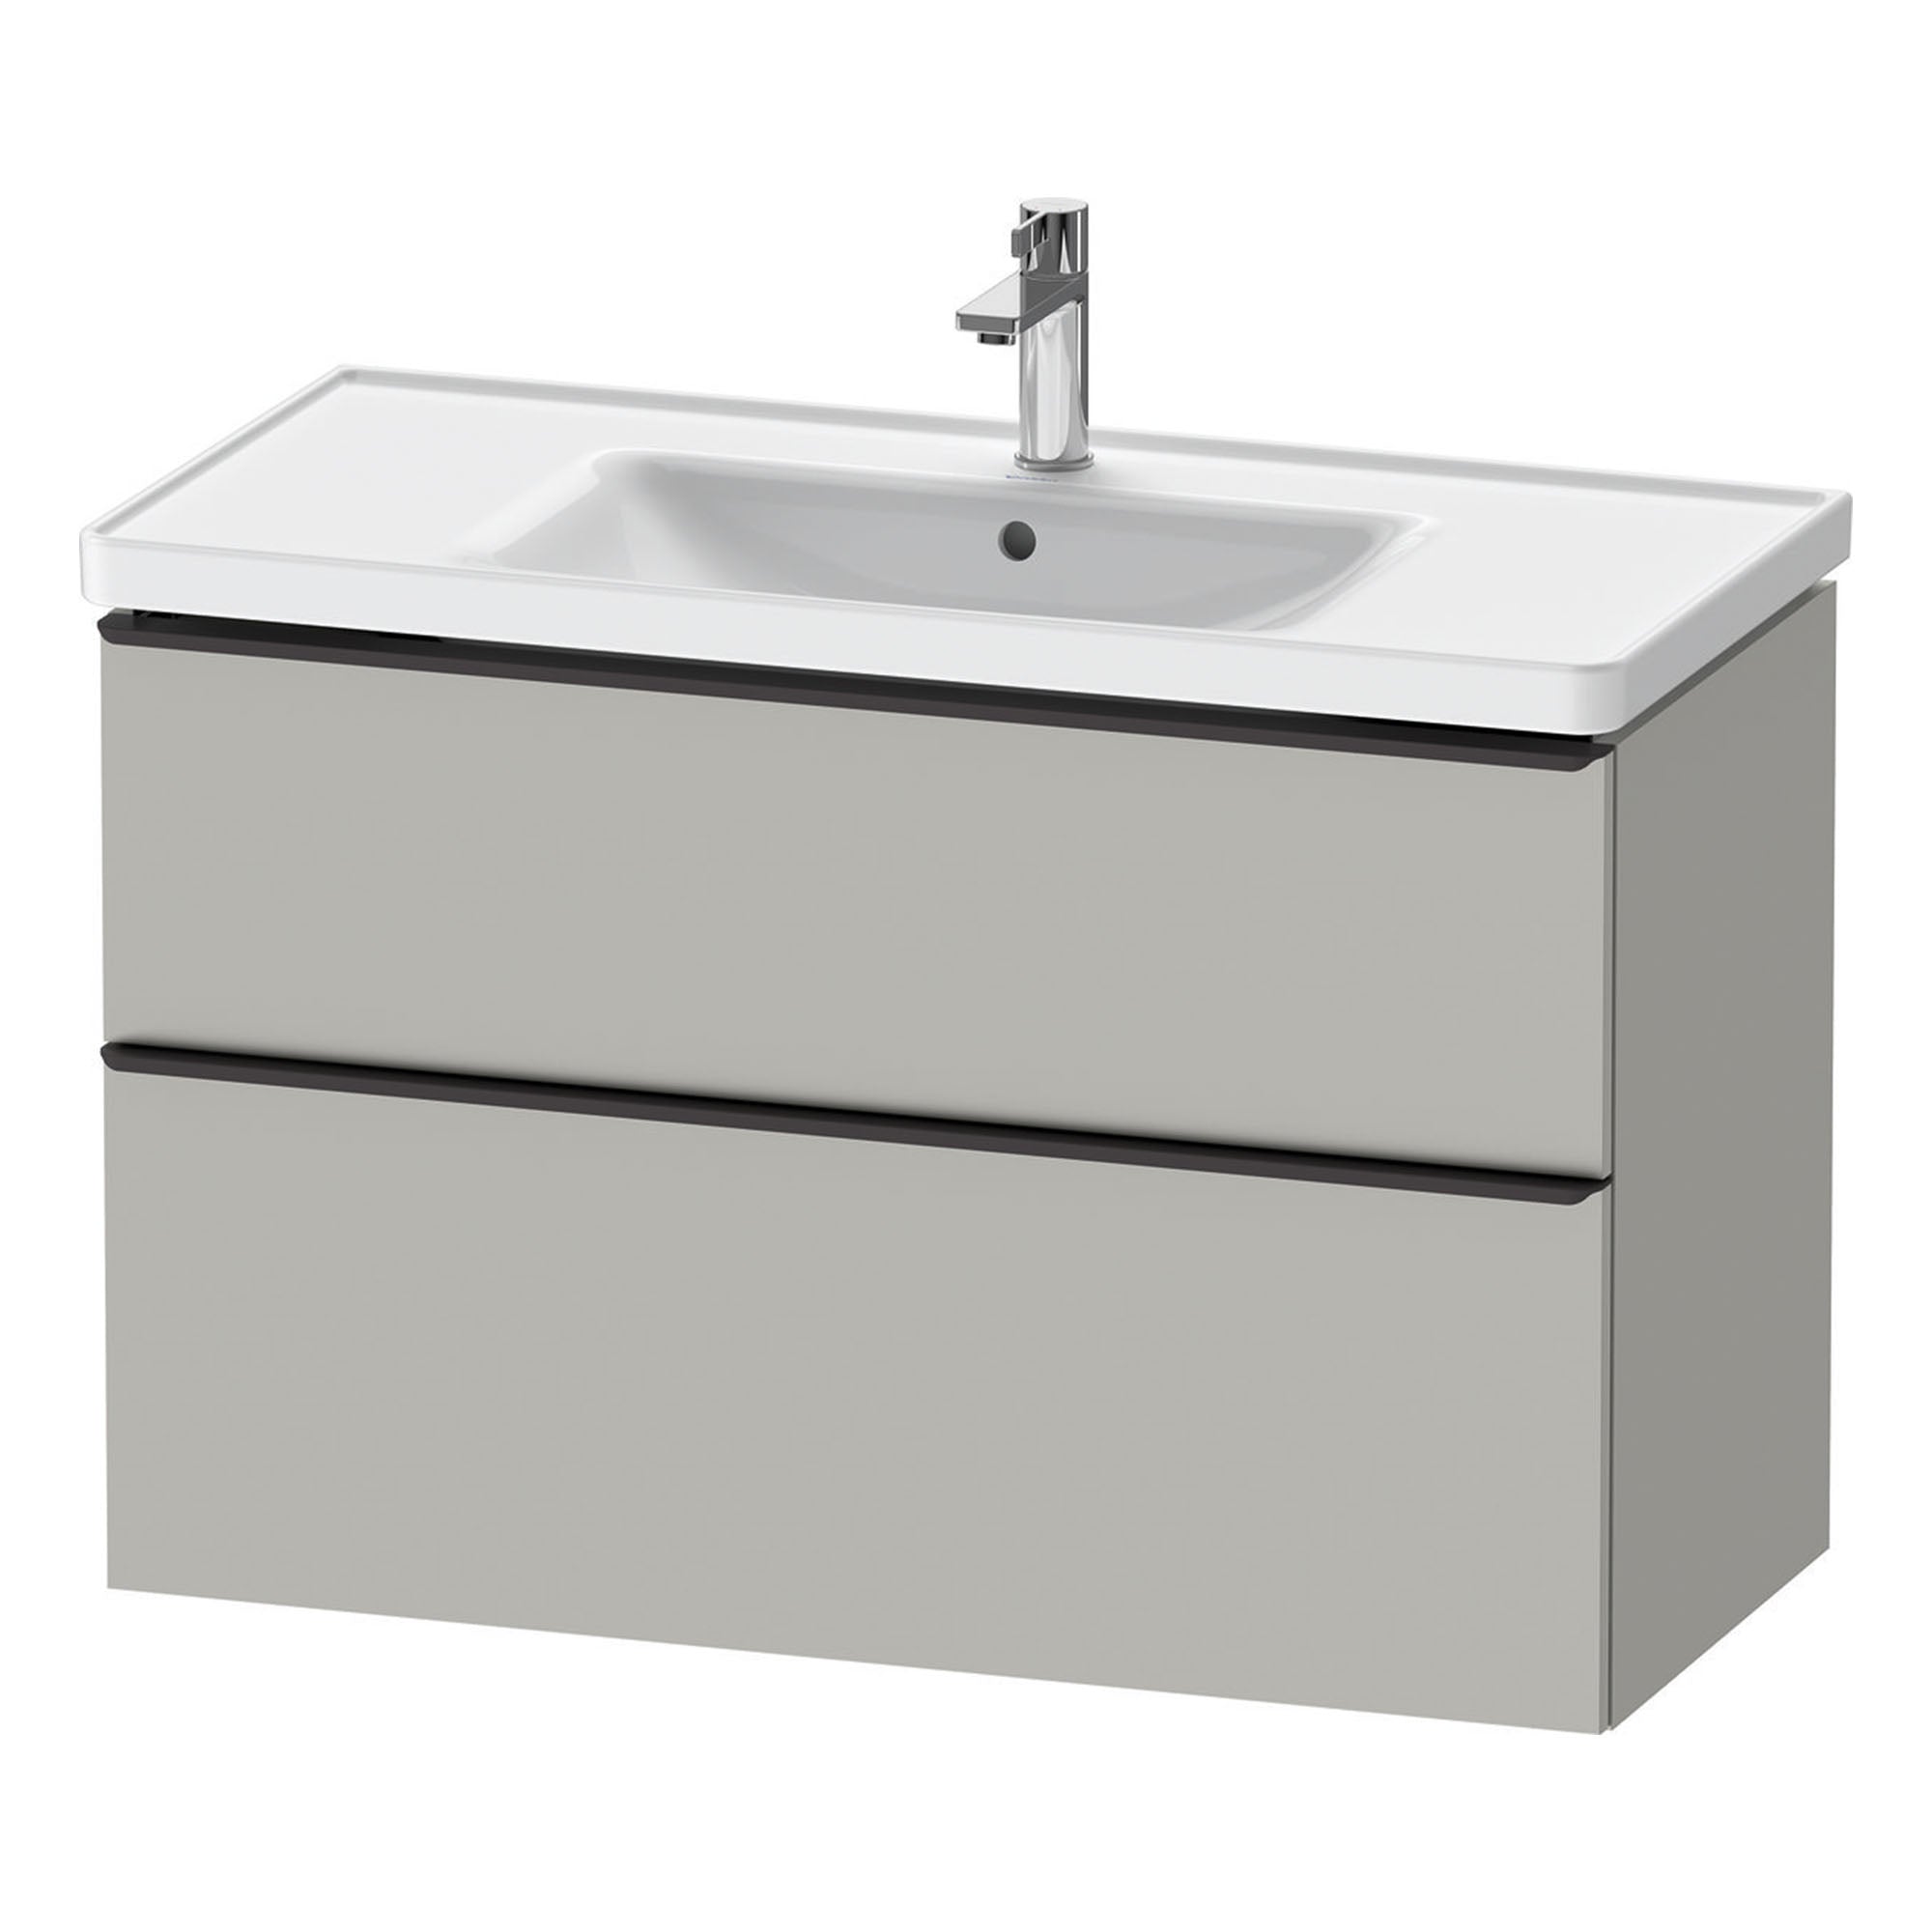 duravit d-neo 1000mm wall mounted vanity unit with d-neo basin concrete grey diamond black handles